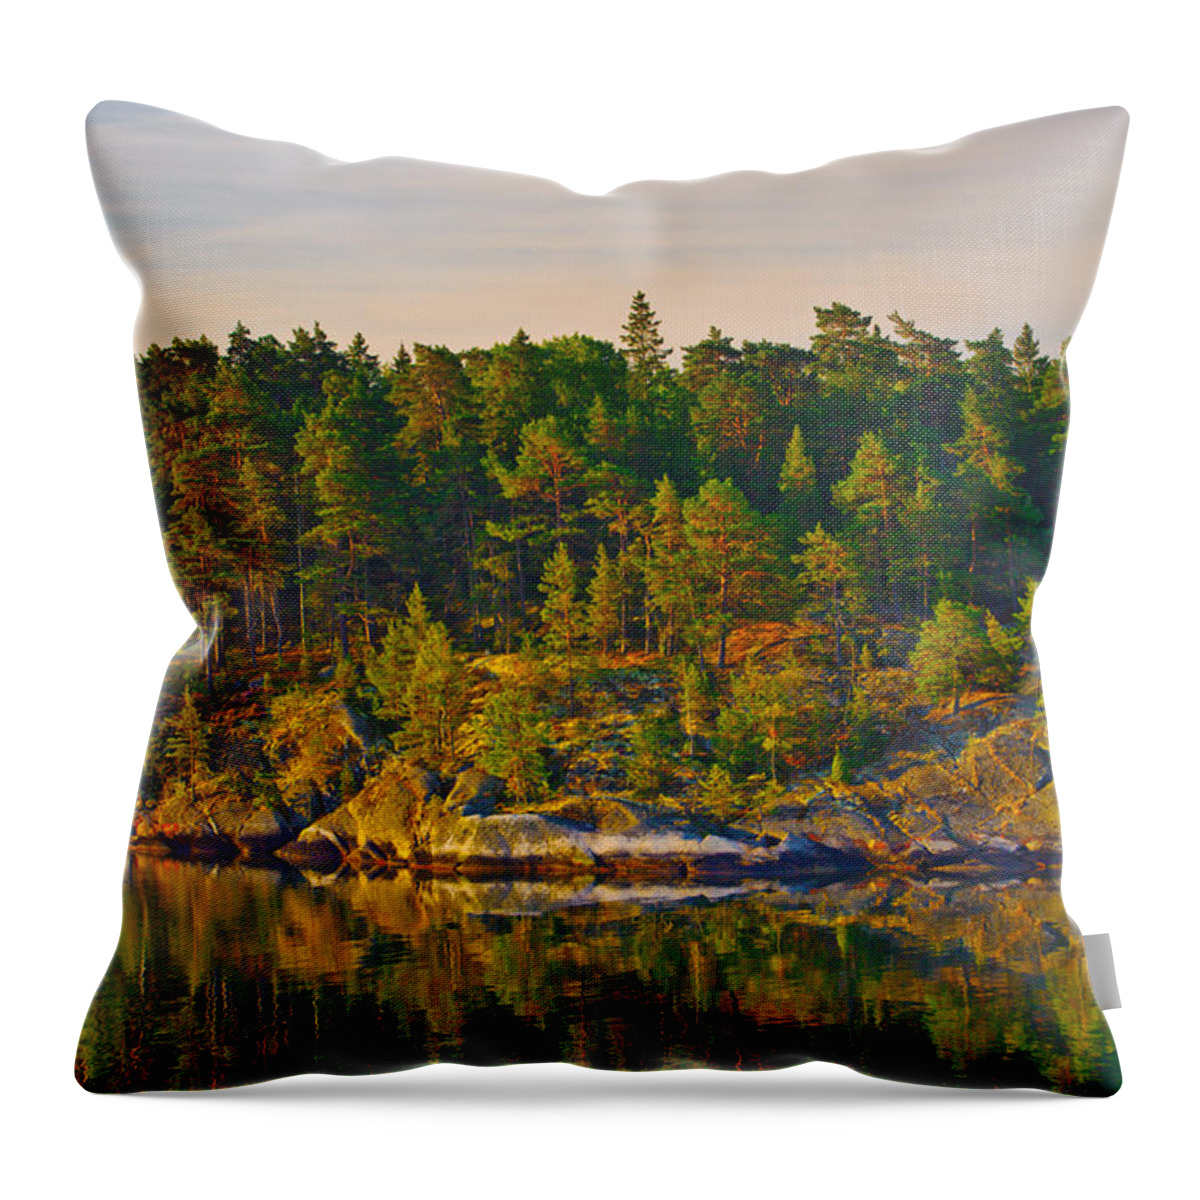 Baltic Sea Throw Pillow featuring the photograph Reflections 2 Sweden by Marianne Campolongo